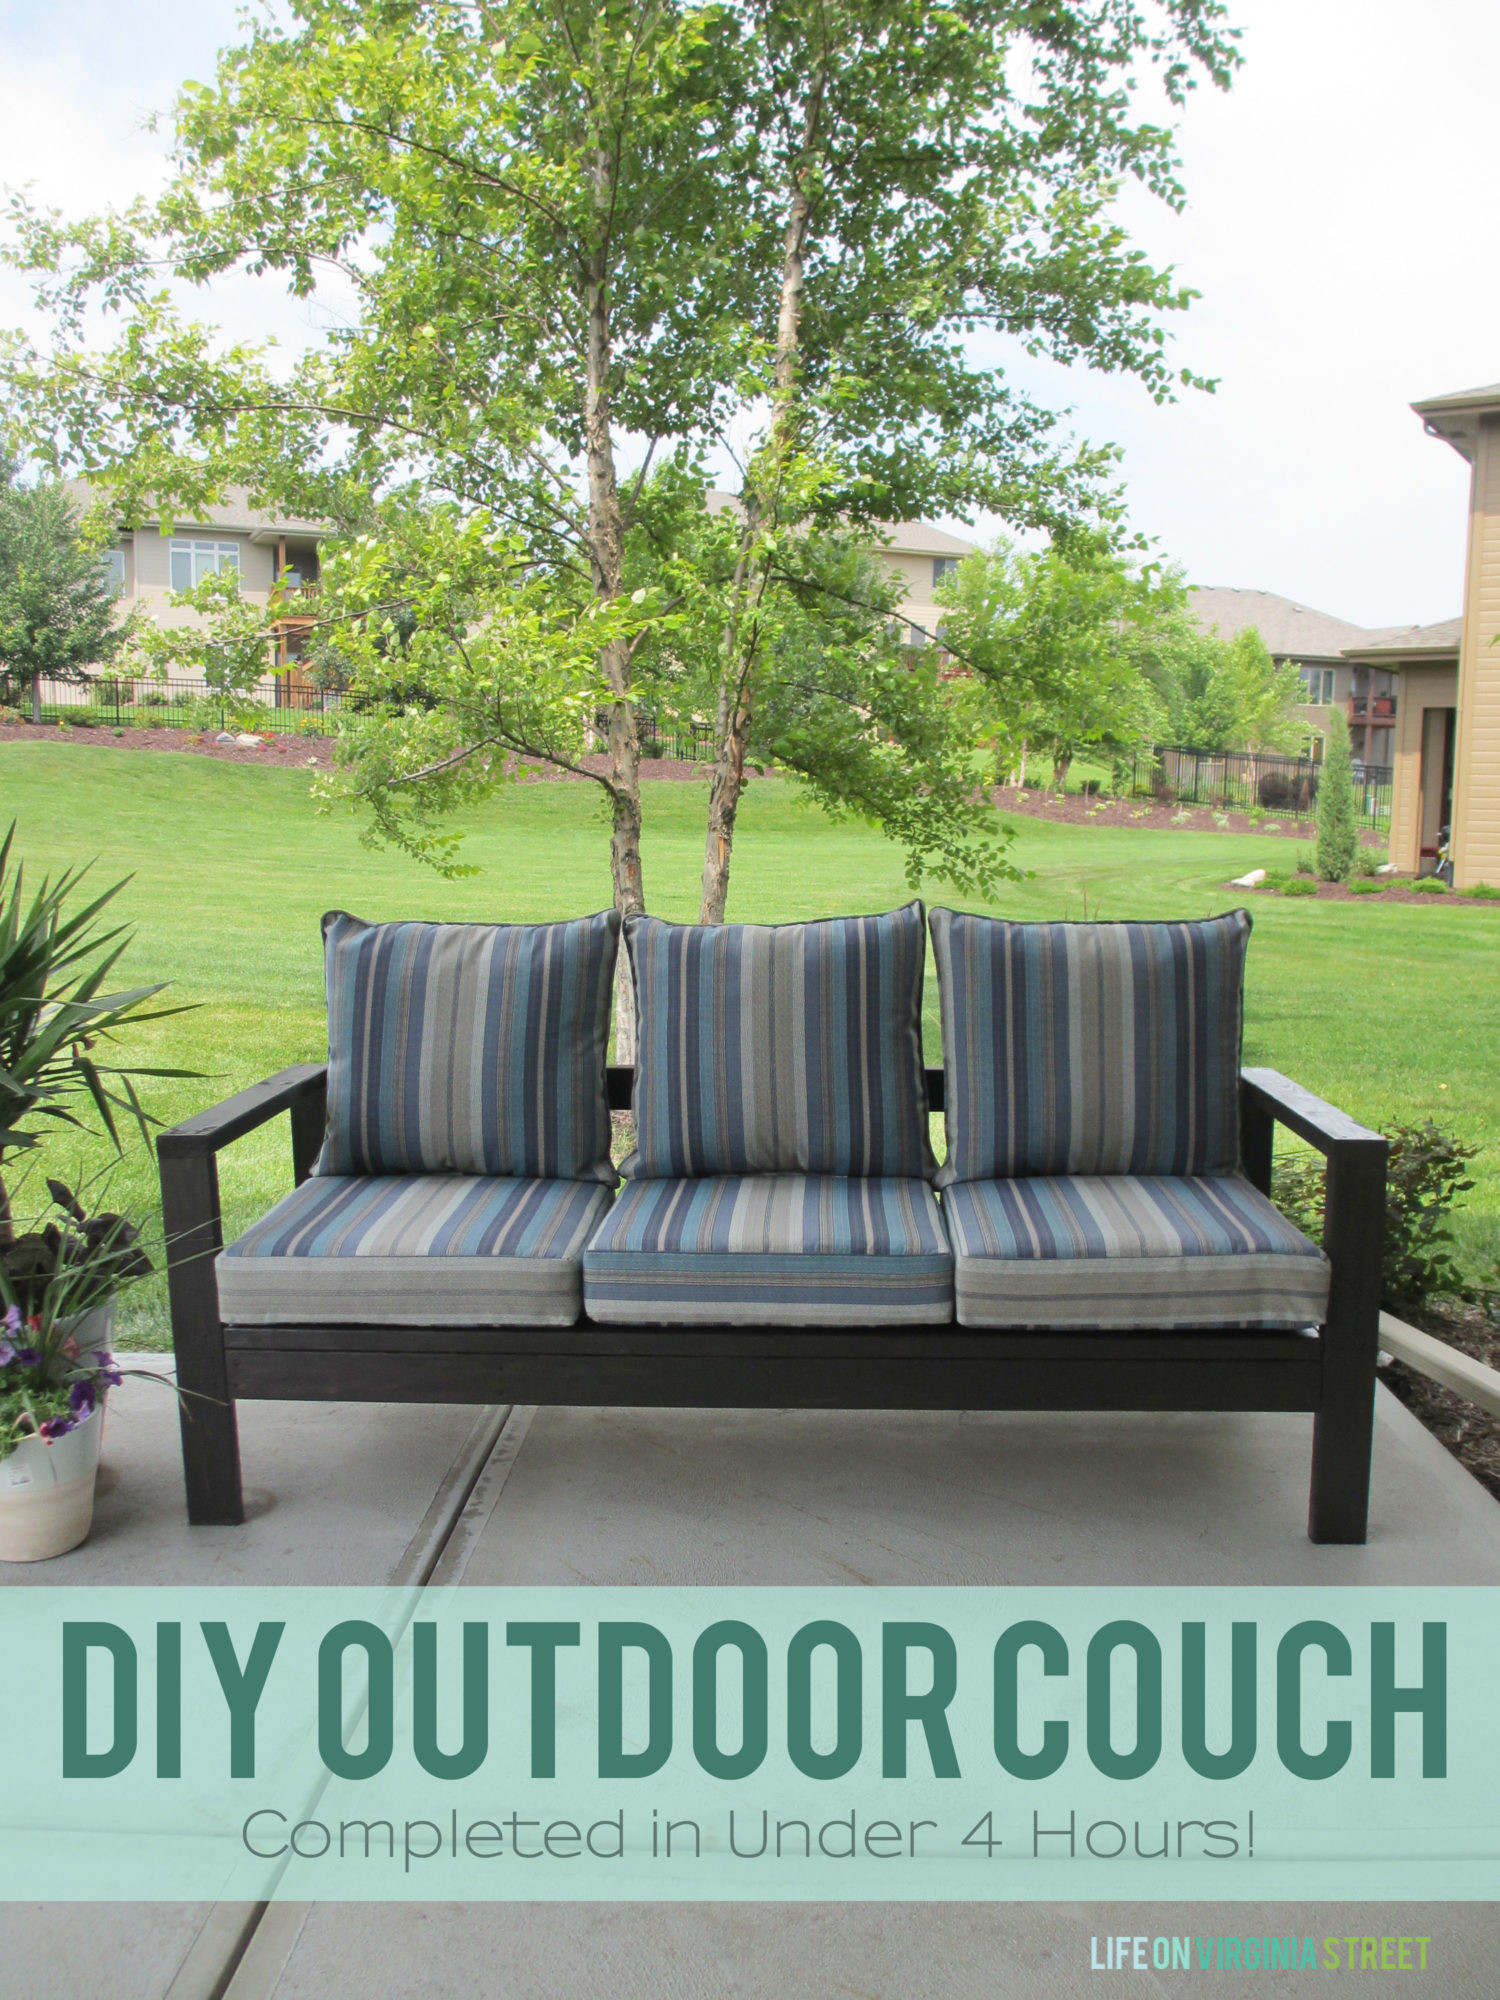 DIY Outdoor Couch Cushions
 DIY Outdoor Couch Life Virginia Street